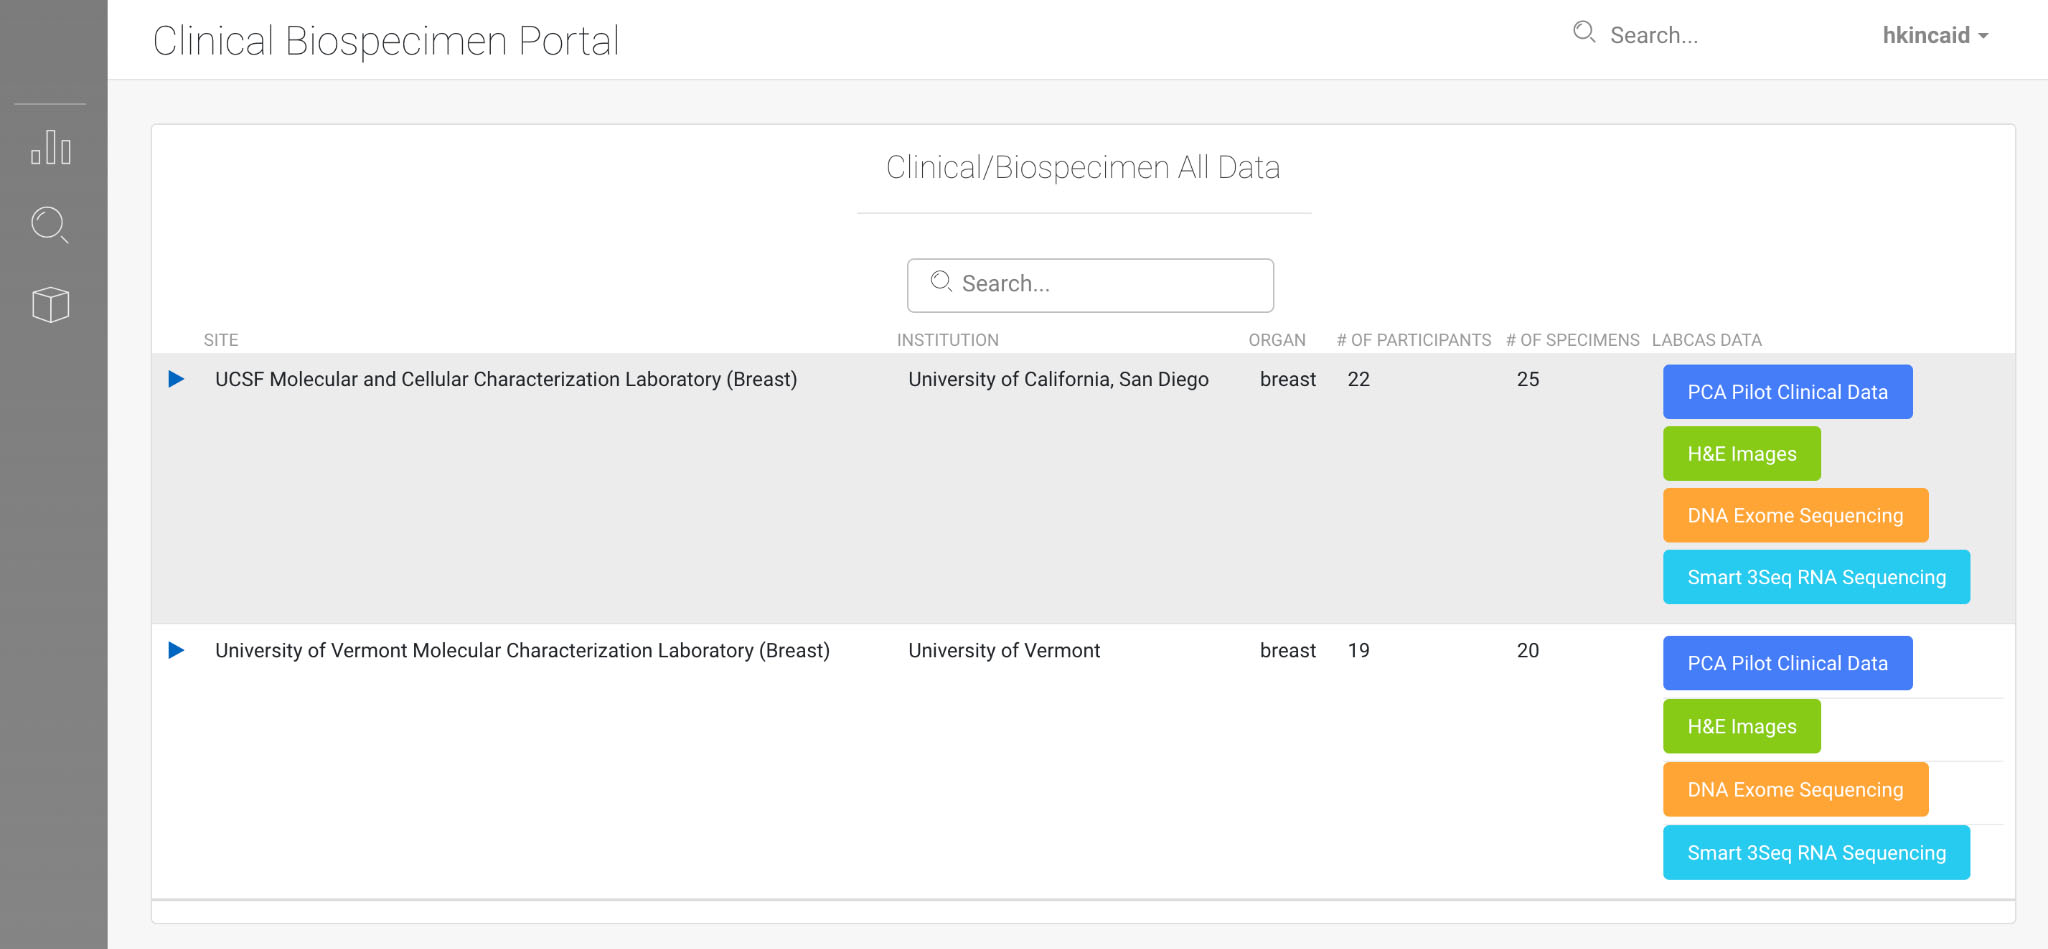 LabCAS Clinical Viewer; this screenshot demonstrates a companion application to LabCAS that enables refined search and discovery of clinical biospecimen data by demographic, organ, and other parameters; like LabCAS, it also runs in any modern web browser.